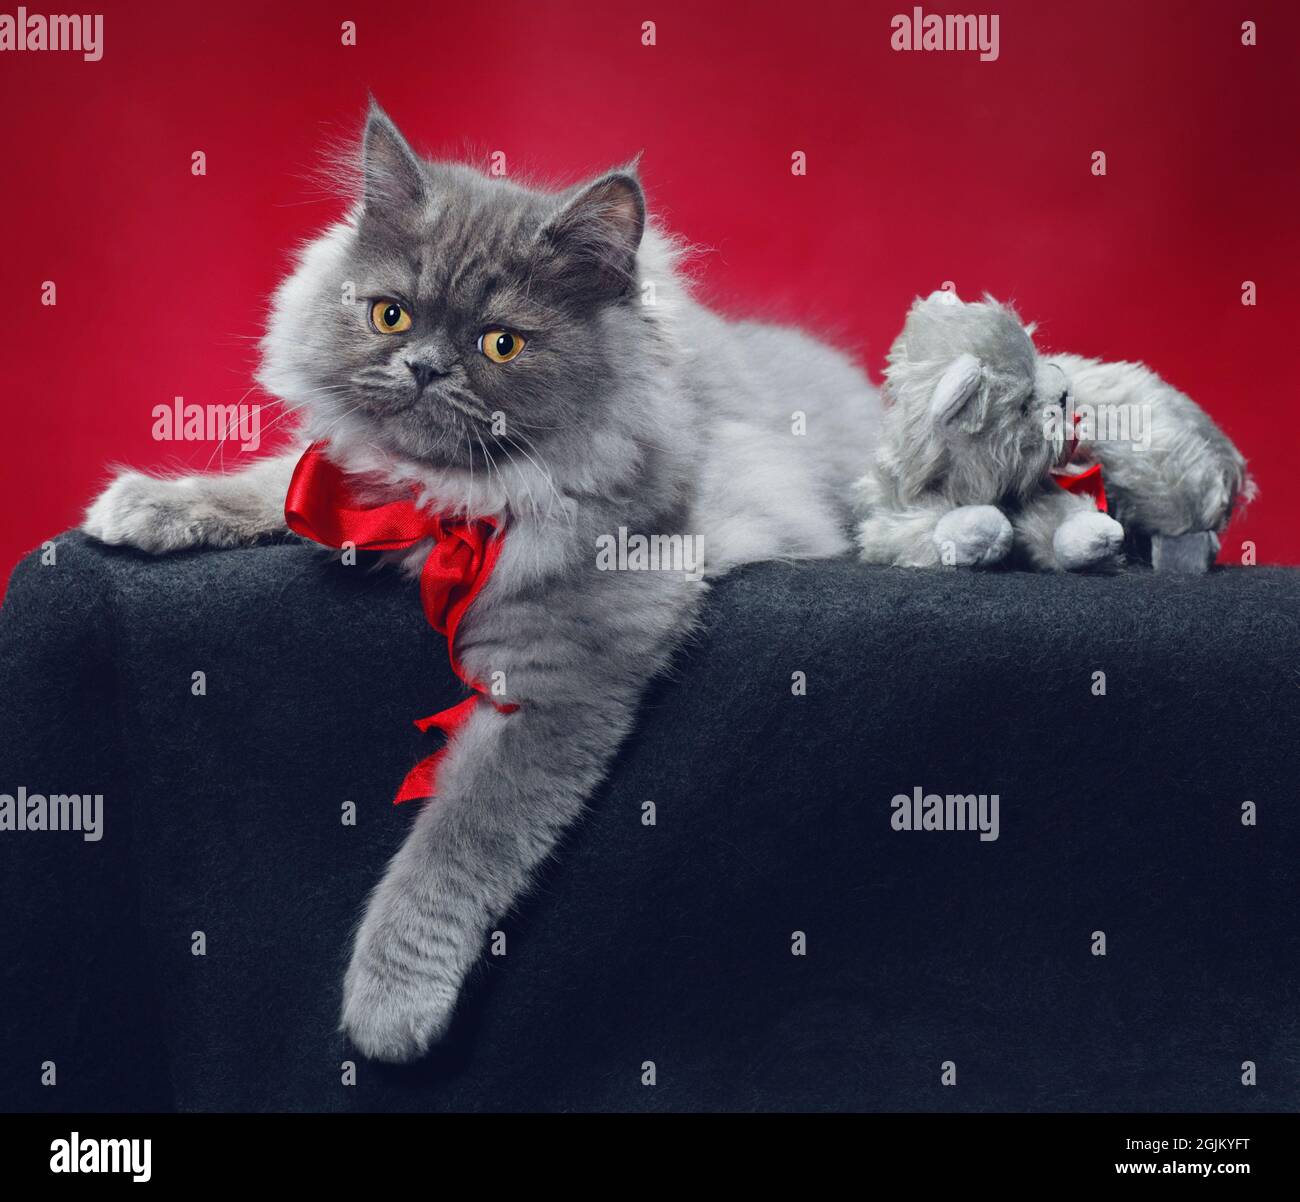 Annoyed looking fluffy grey long haired cat wearing a red bow, with a stuffed grey cat wearing a matching red bow. Stock Photo